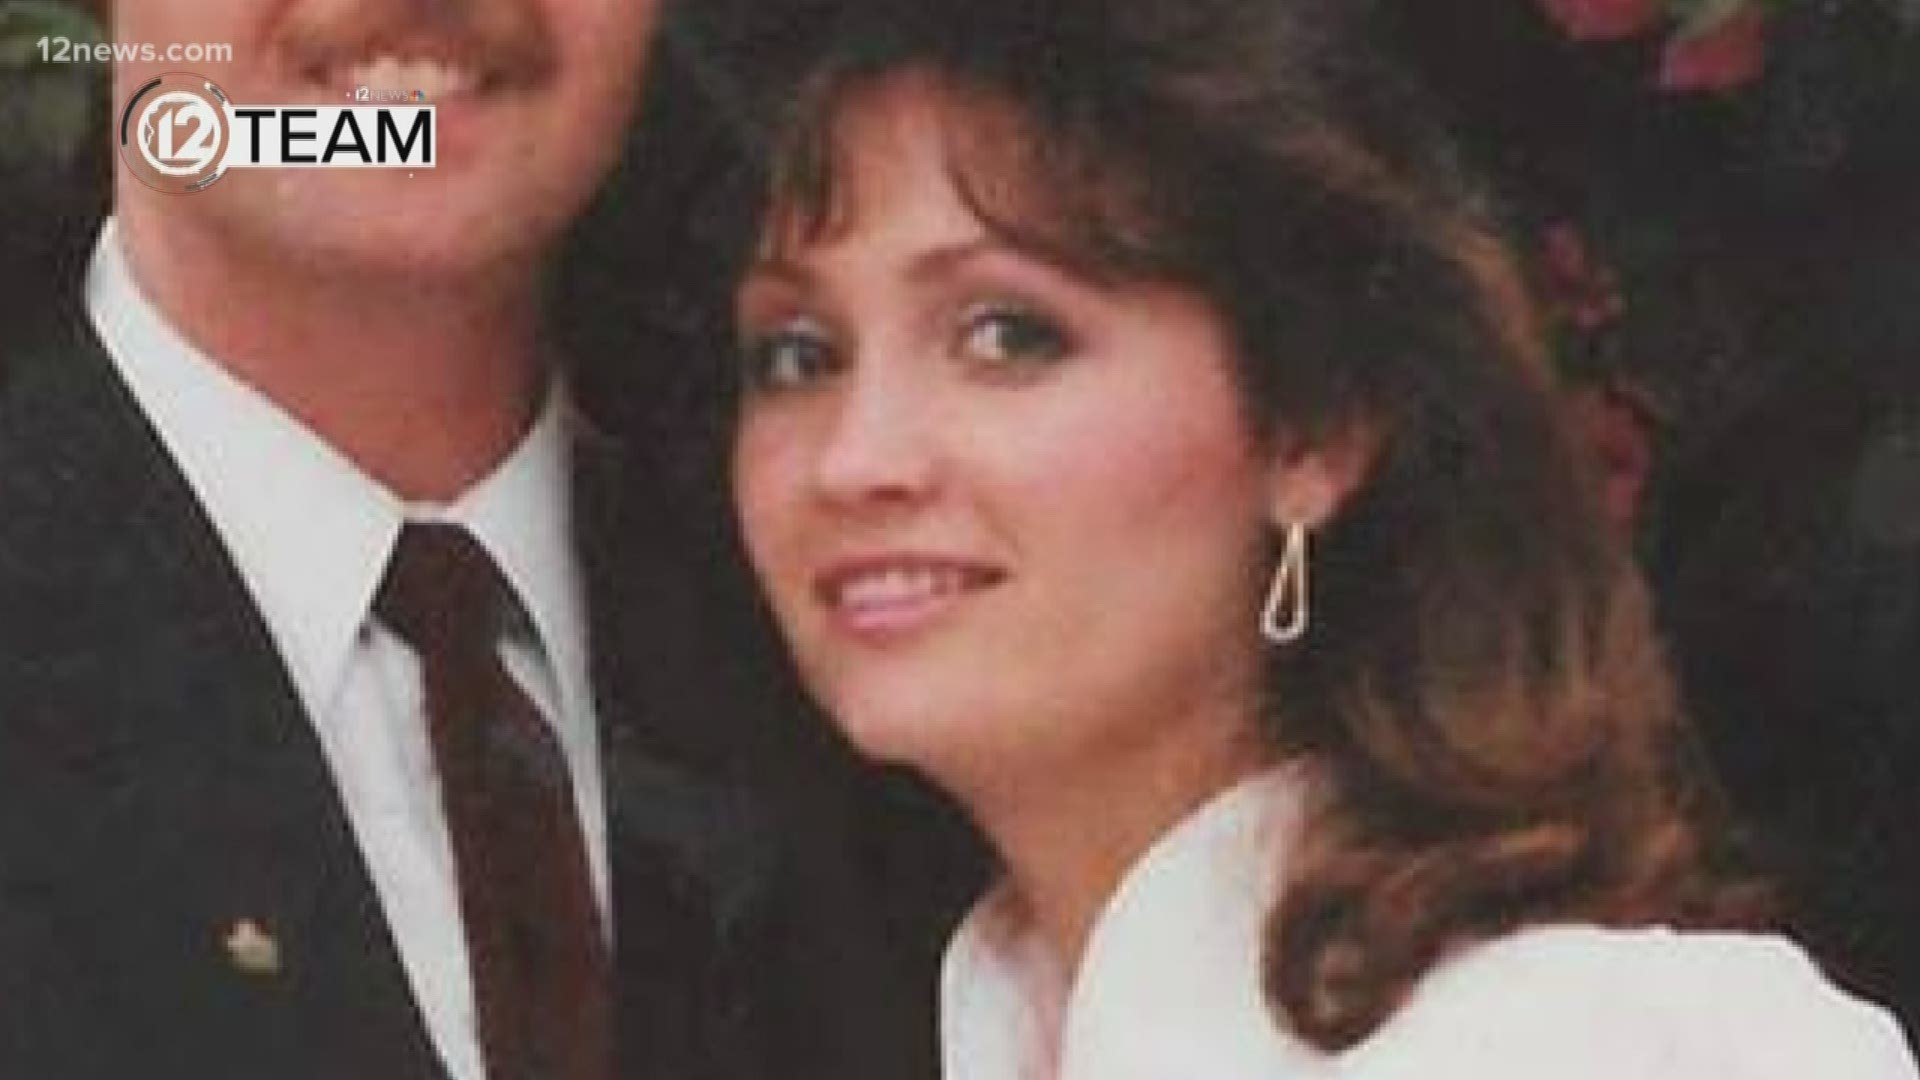 A pregnant  Mesa mother was brutally murdered in her home more than 30 years ago. Her killer is still unknown. Team 12's Joe Dana has the story.